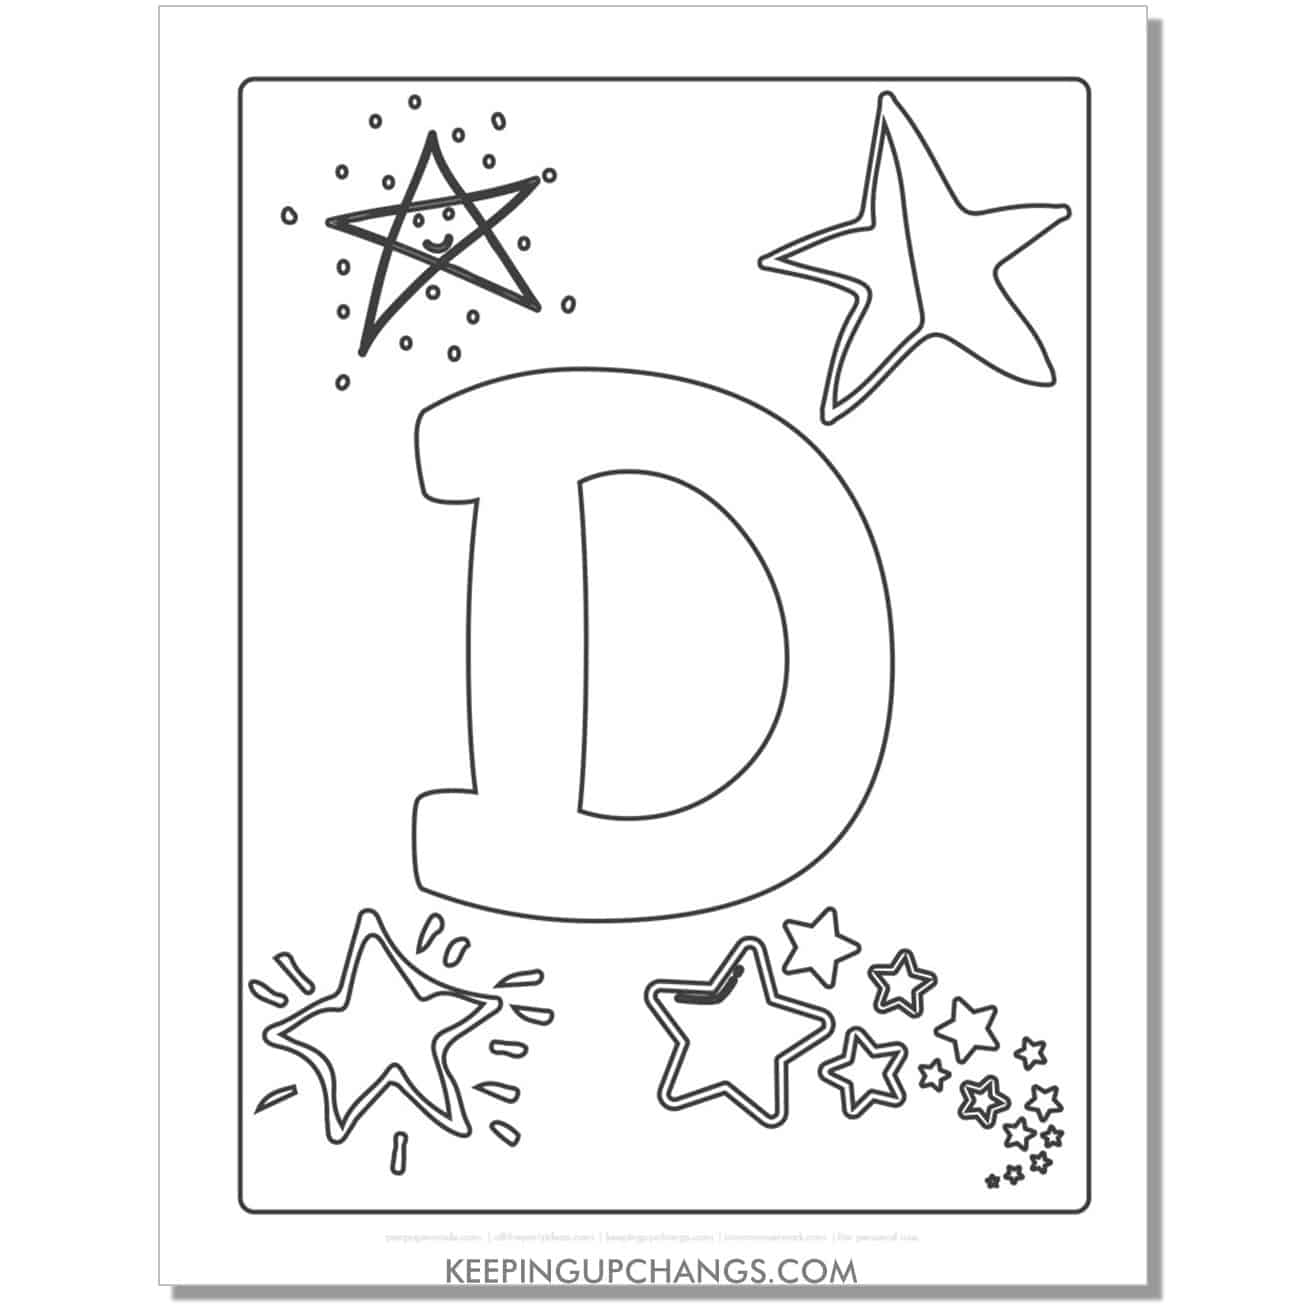 cool letter d to color with stars, space theme.